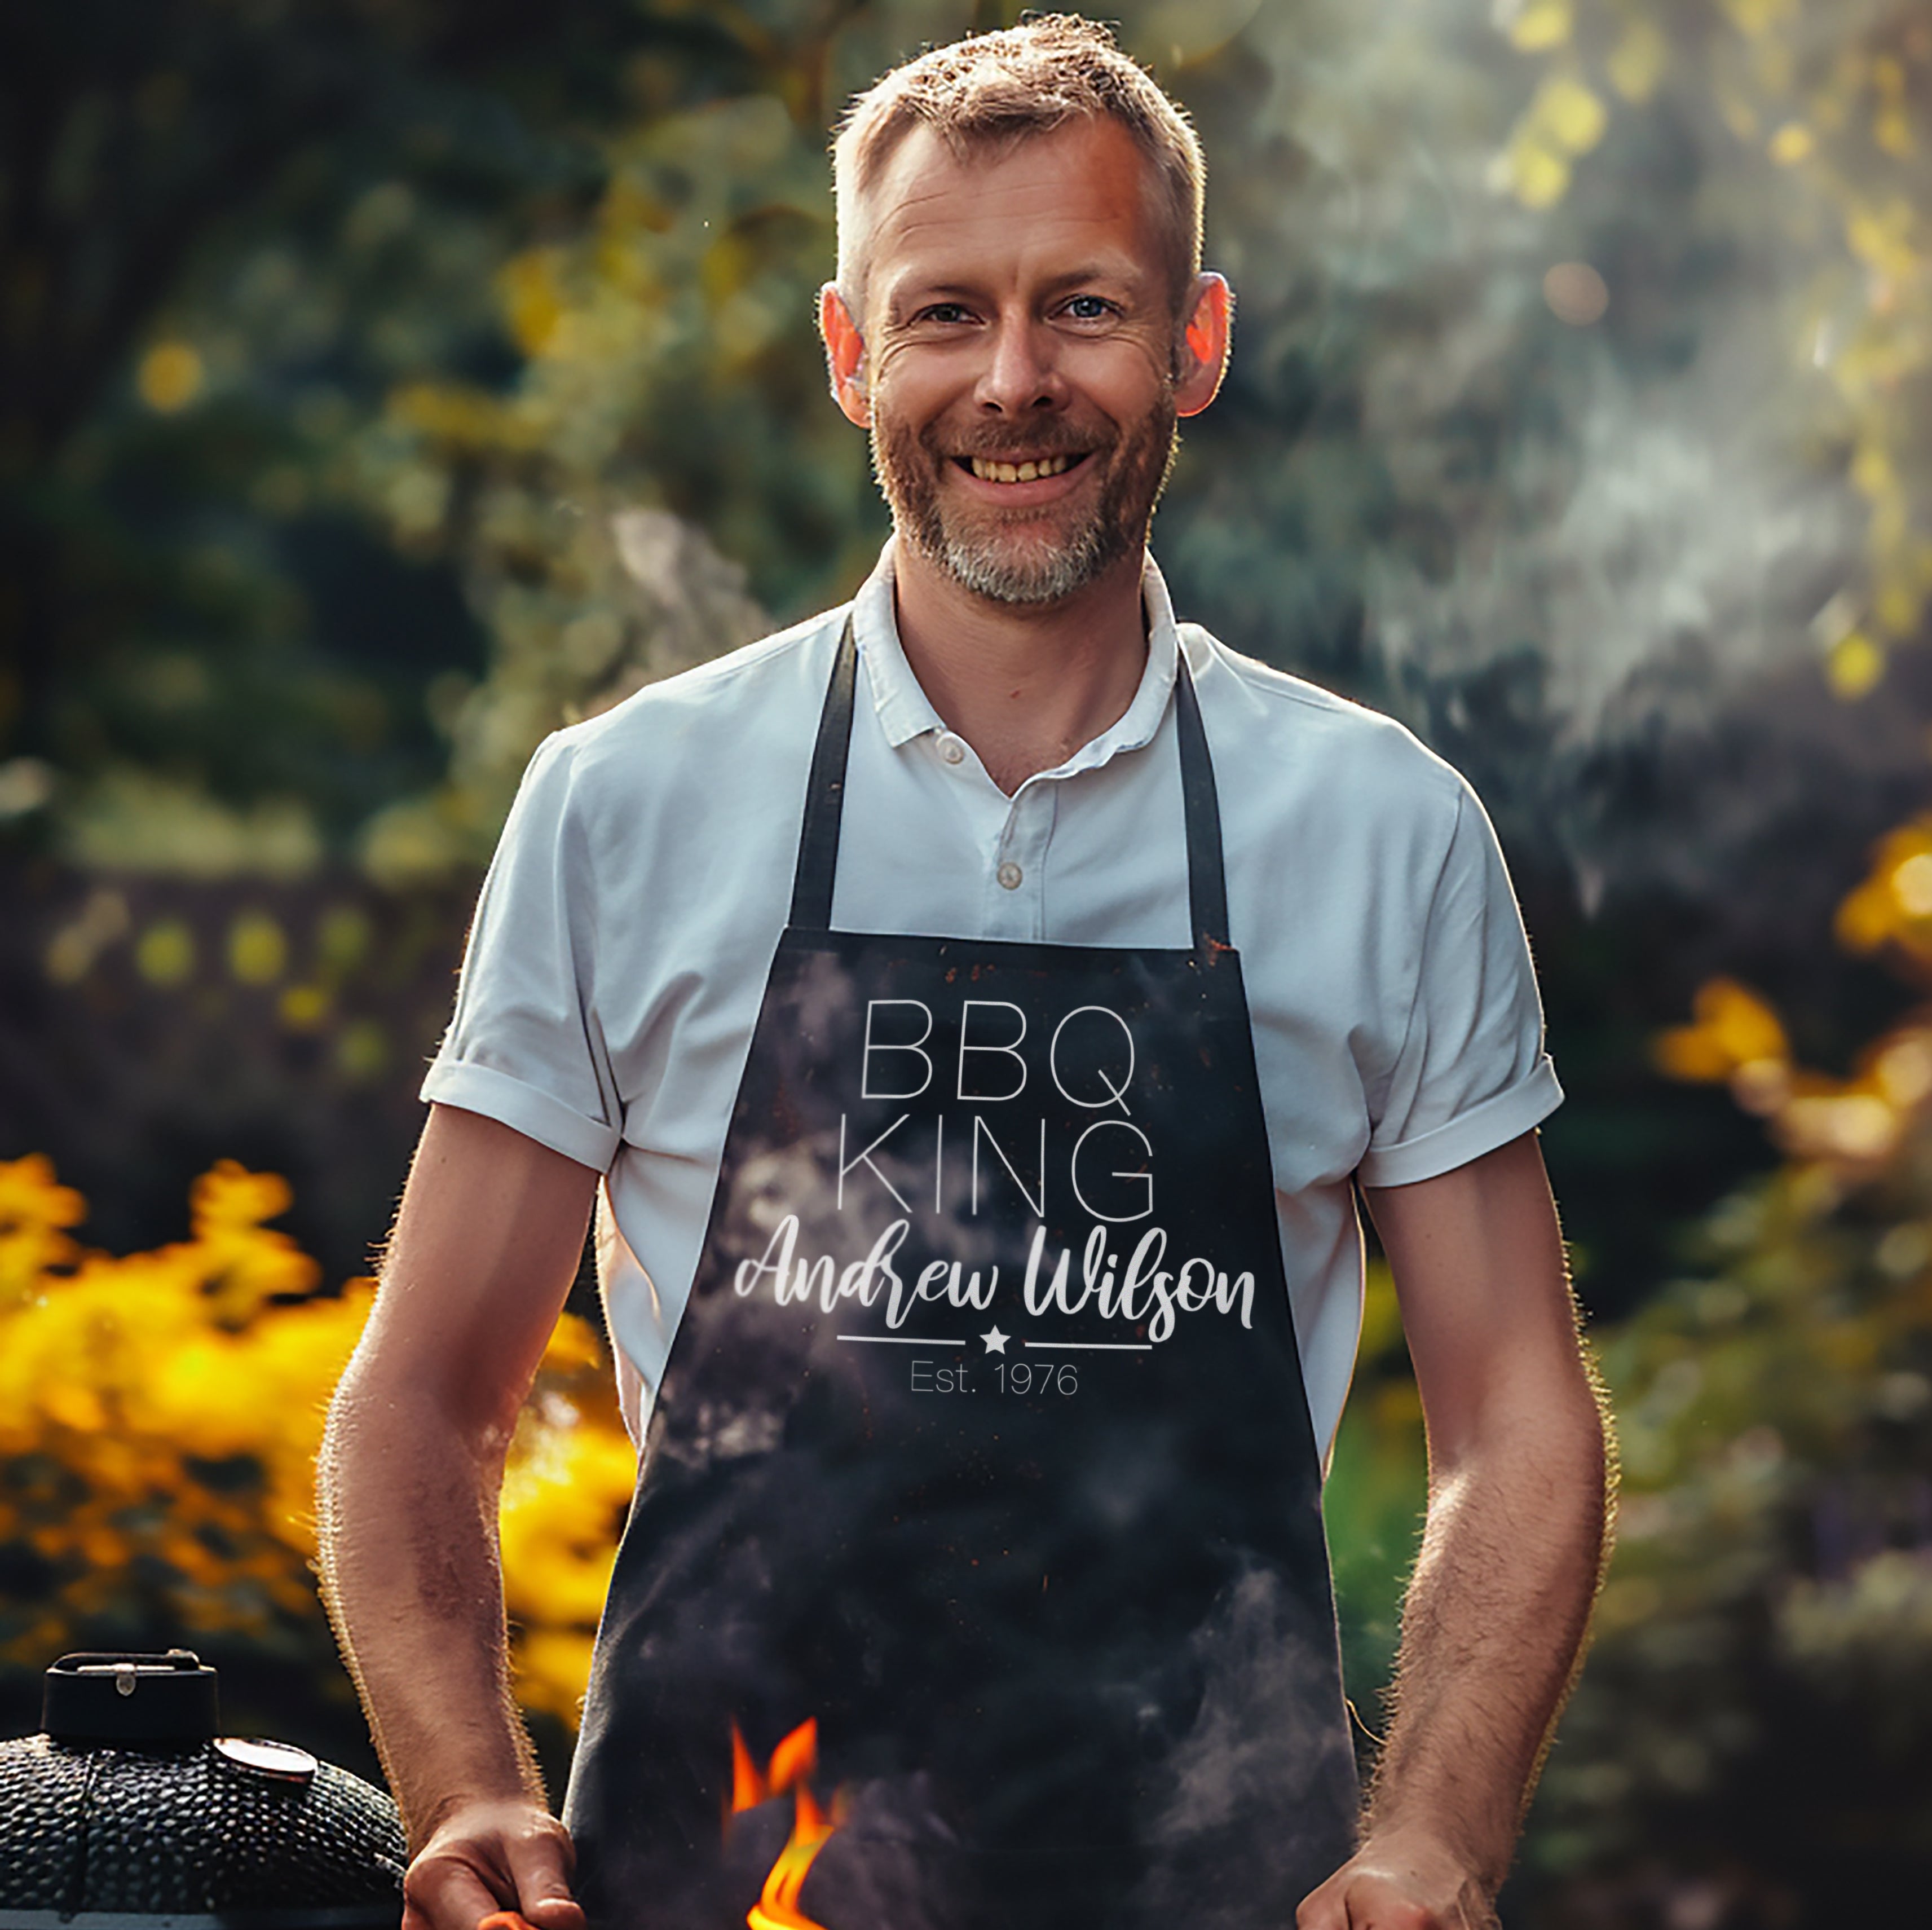 Personalised Barbecue King Apron, BBQ Apron